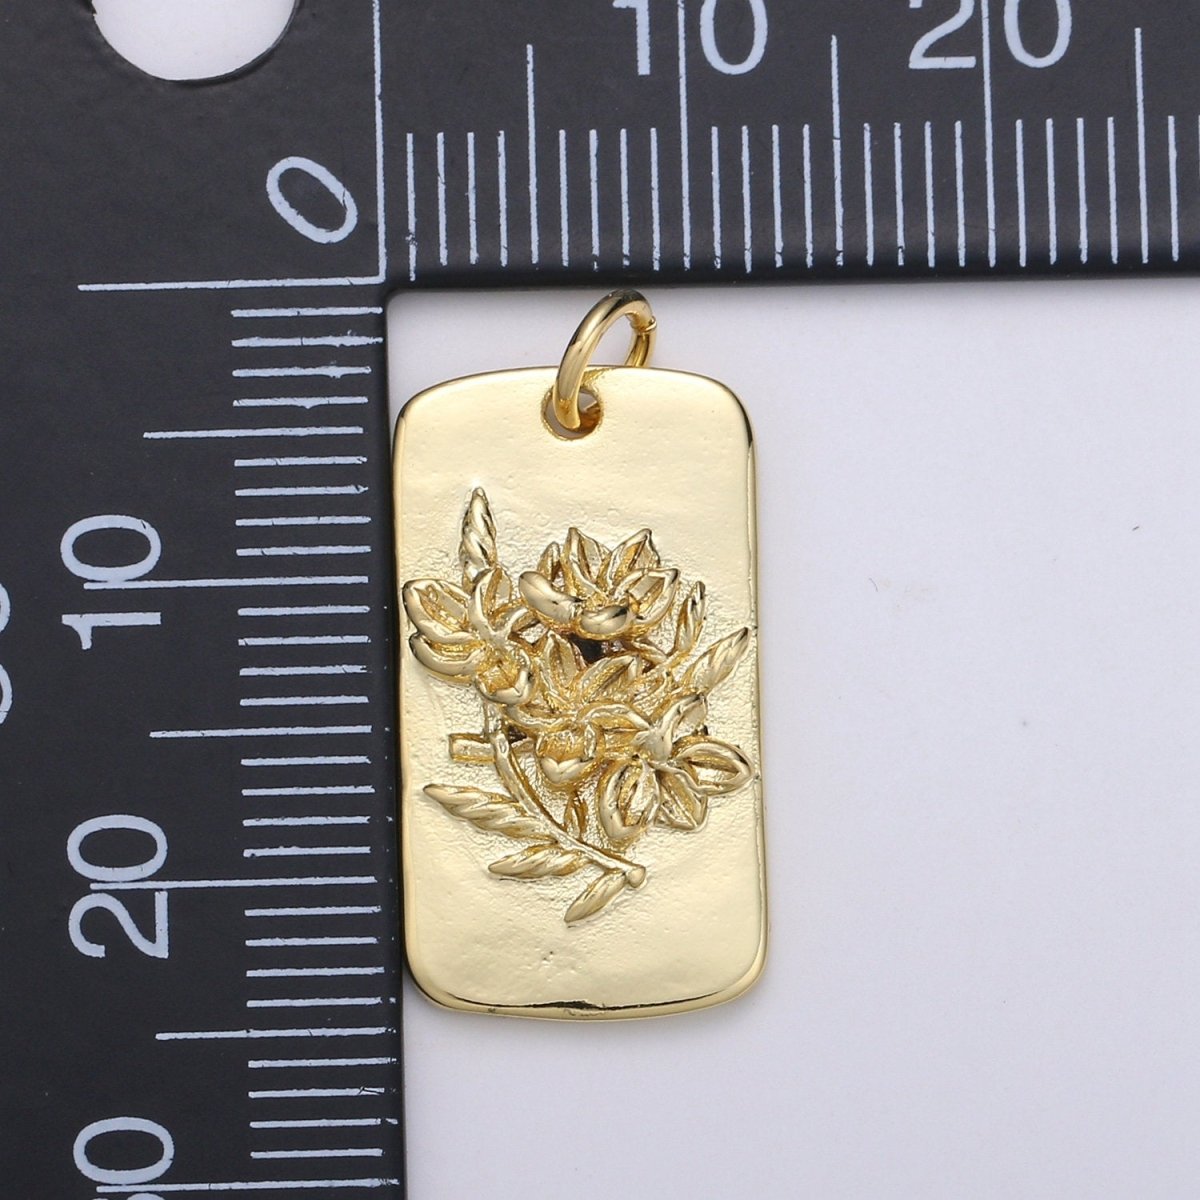 Hibiscus Charms, Gold Hibiscus Pendant, Dainty Hibiscus Charm, Small Wild Flower Charm for Necklace Floral Flower Tag Jewelry D-766 - DLUXCA